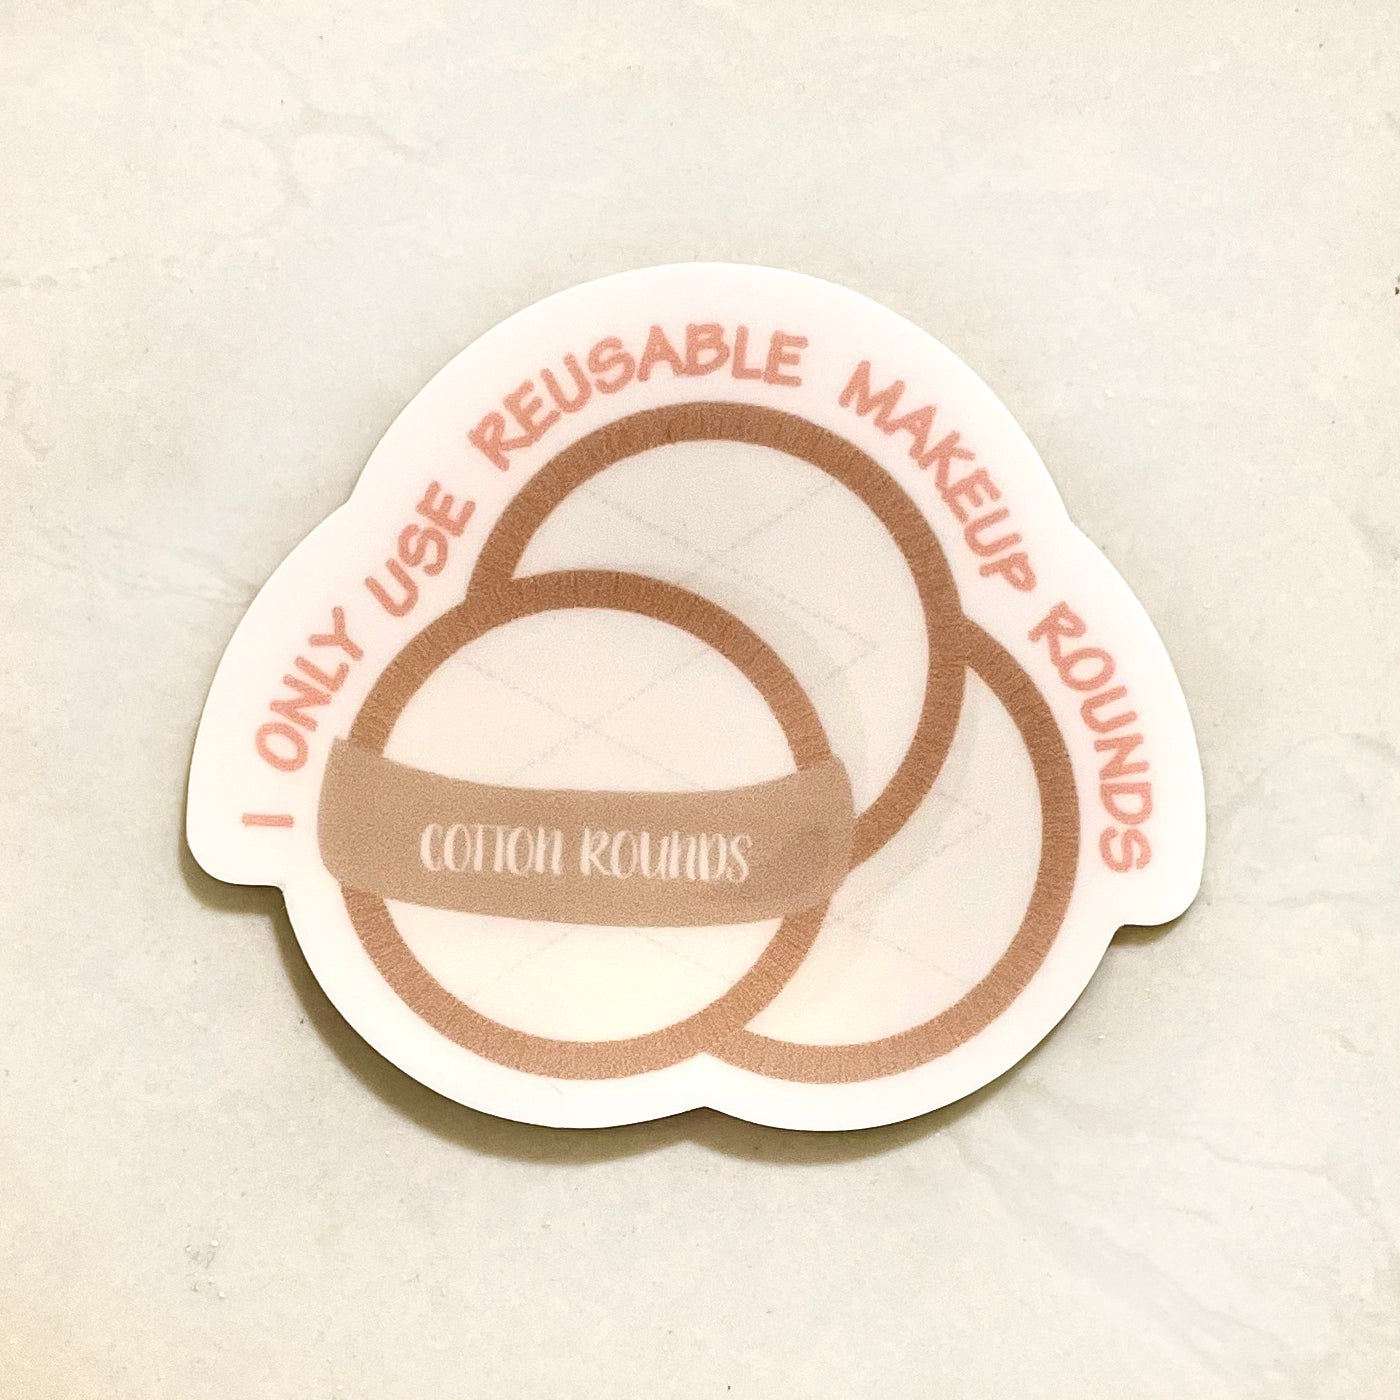 image for "I Only Use Reusable Makeup Rounds" Sticker